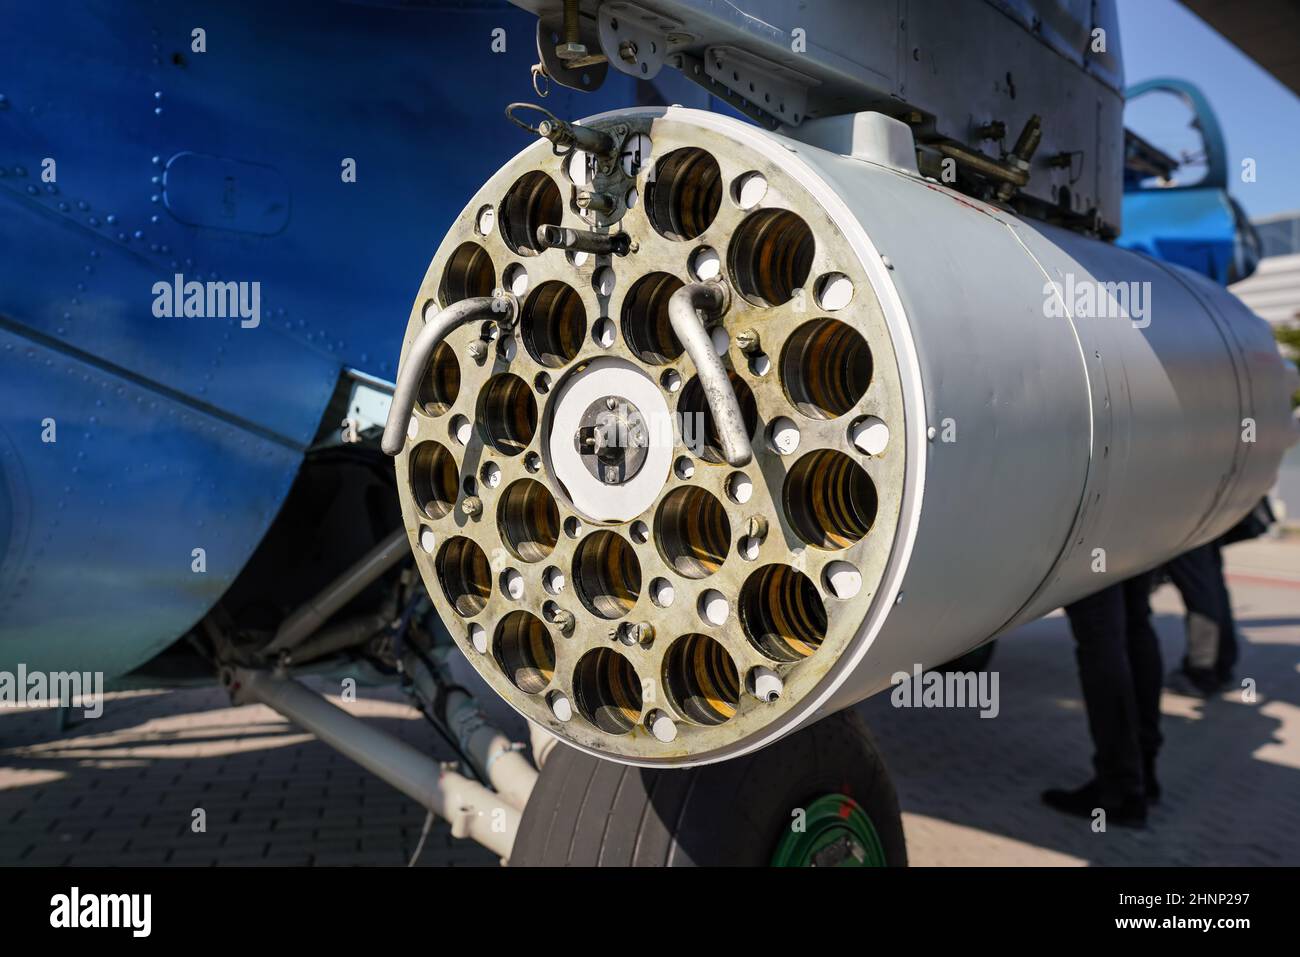 Military combat helicopter side gun or cannon, detail view from behind with tube holes for ammunition Stock Photo